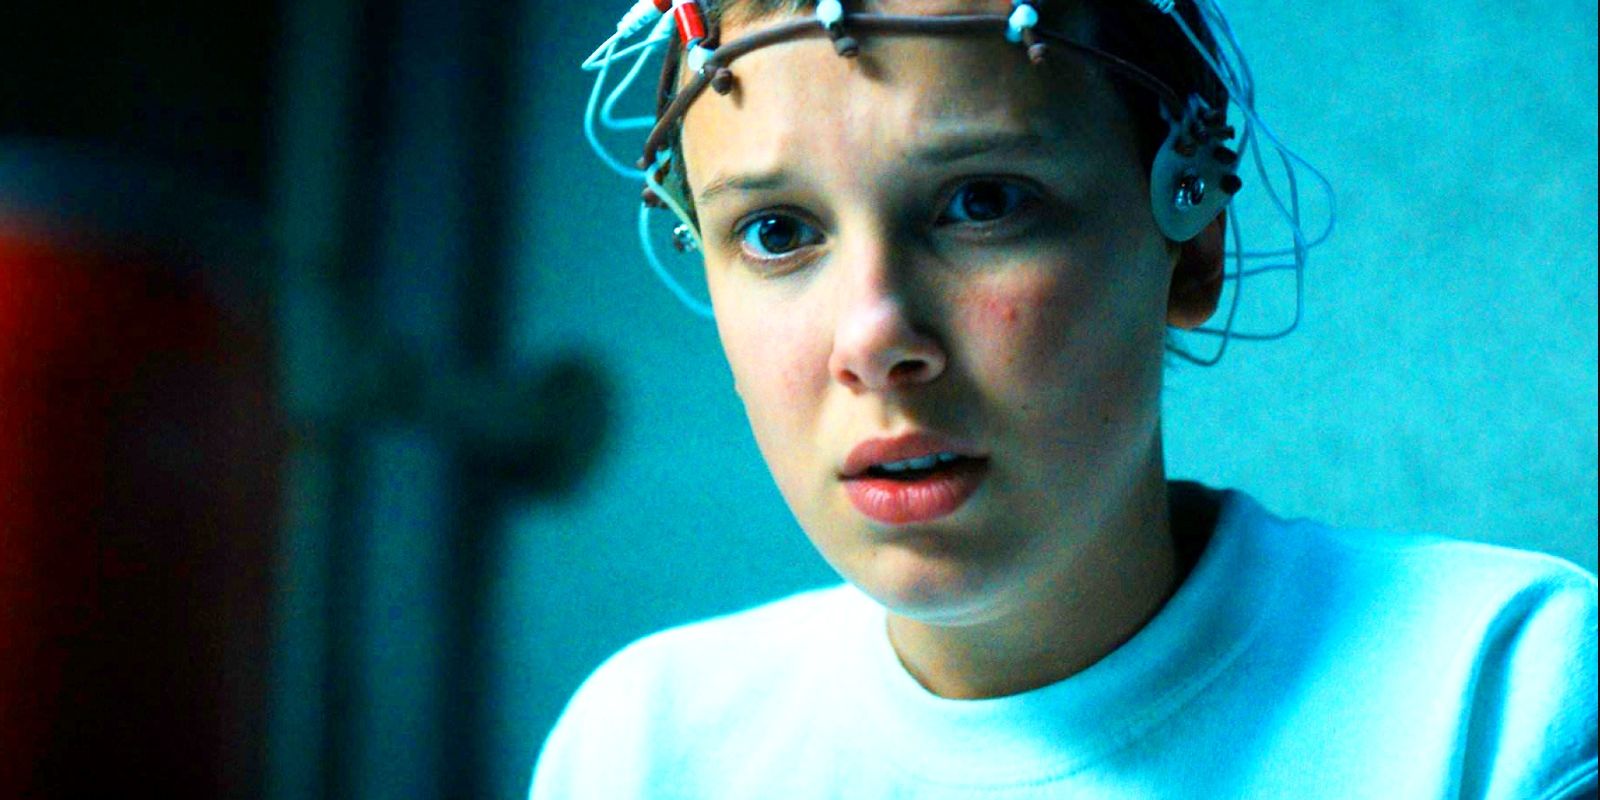 Millie Bobby Brown as Eleven looking concerned with a device on her head in Stranger Things season 4